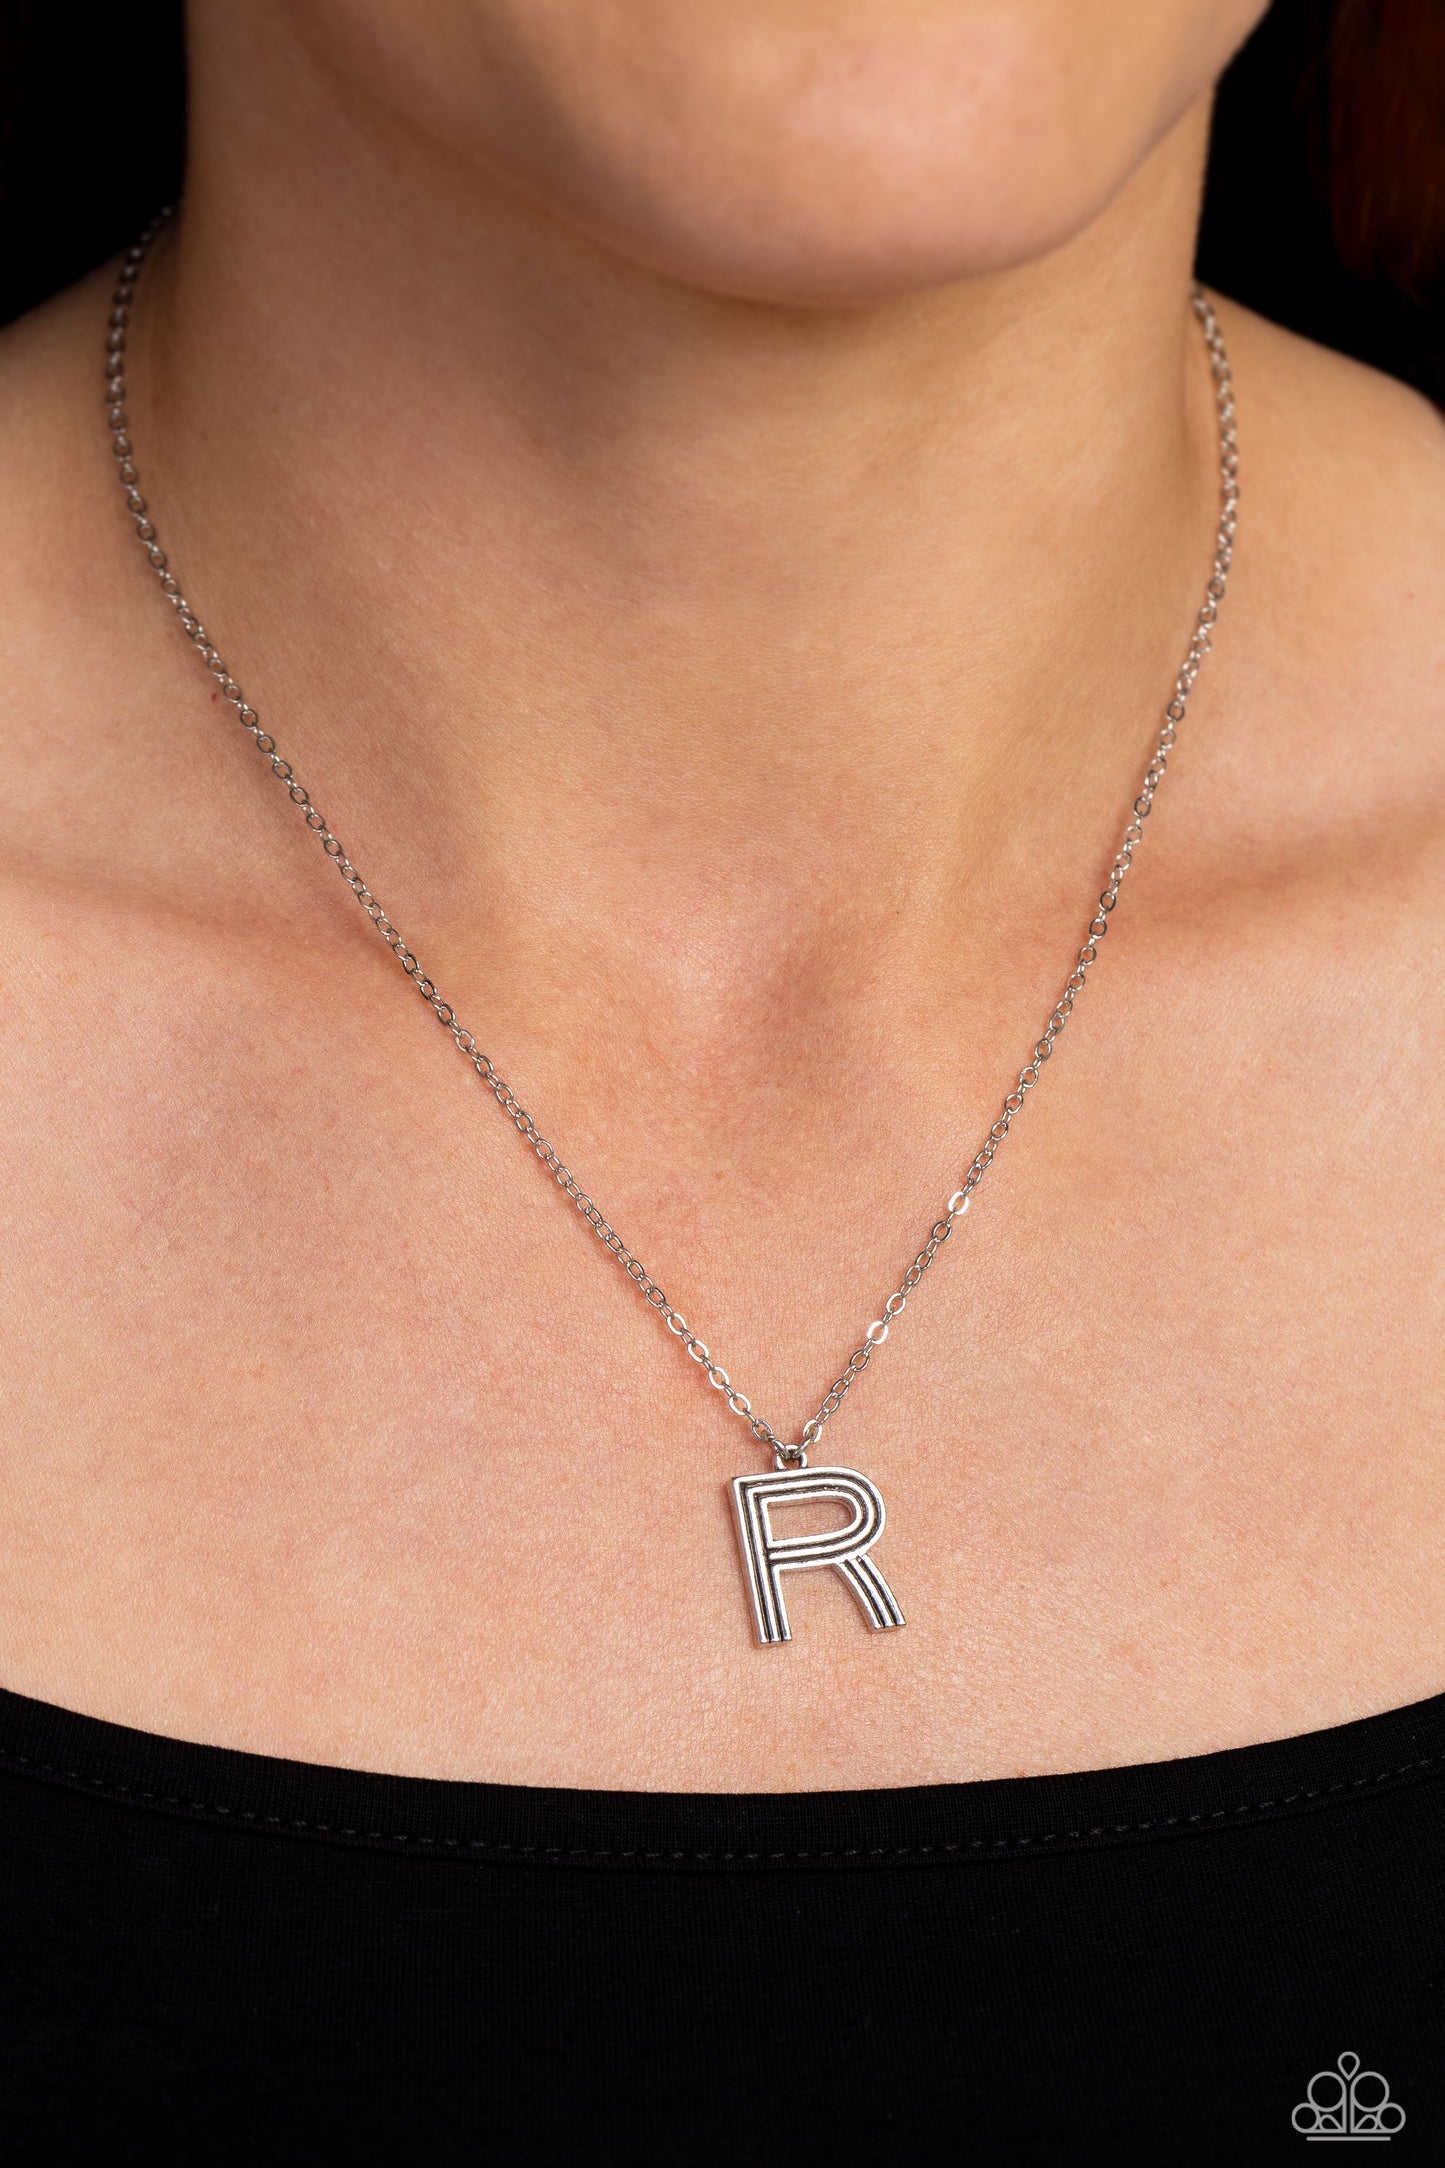 Leave Your Initials - Silver "R" Pendant Paparazzi Necklace & matching earrings